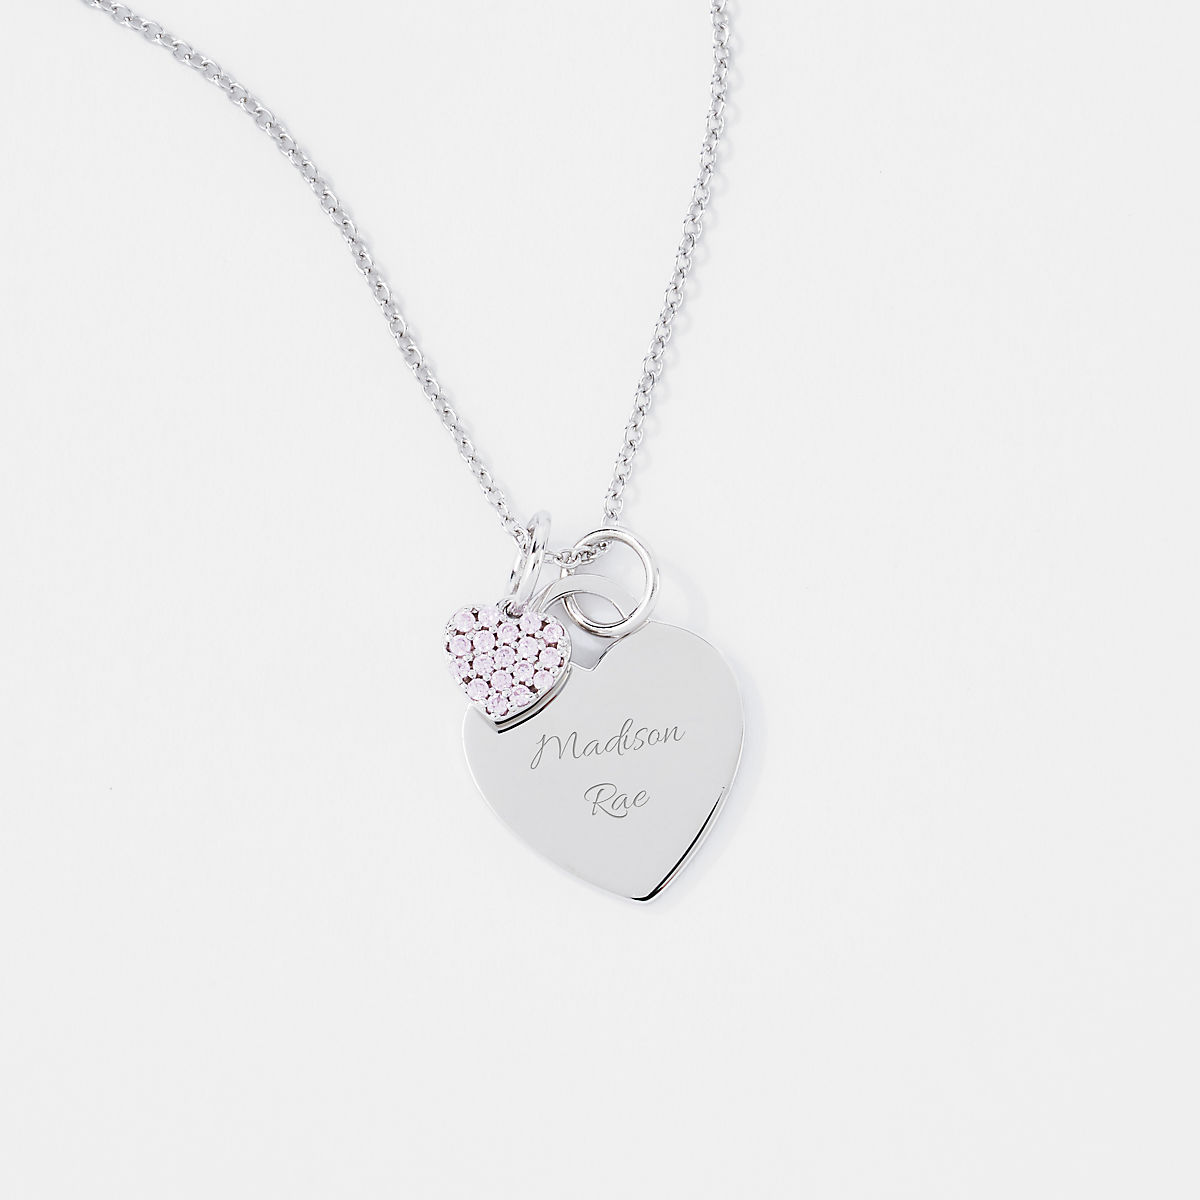 Special Granddaughter Charm Optional Engraving on Back. Stg Silver Heart 